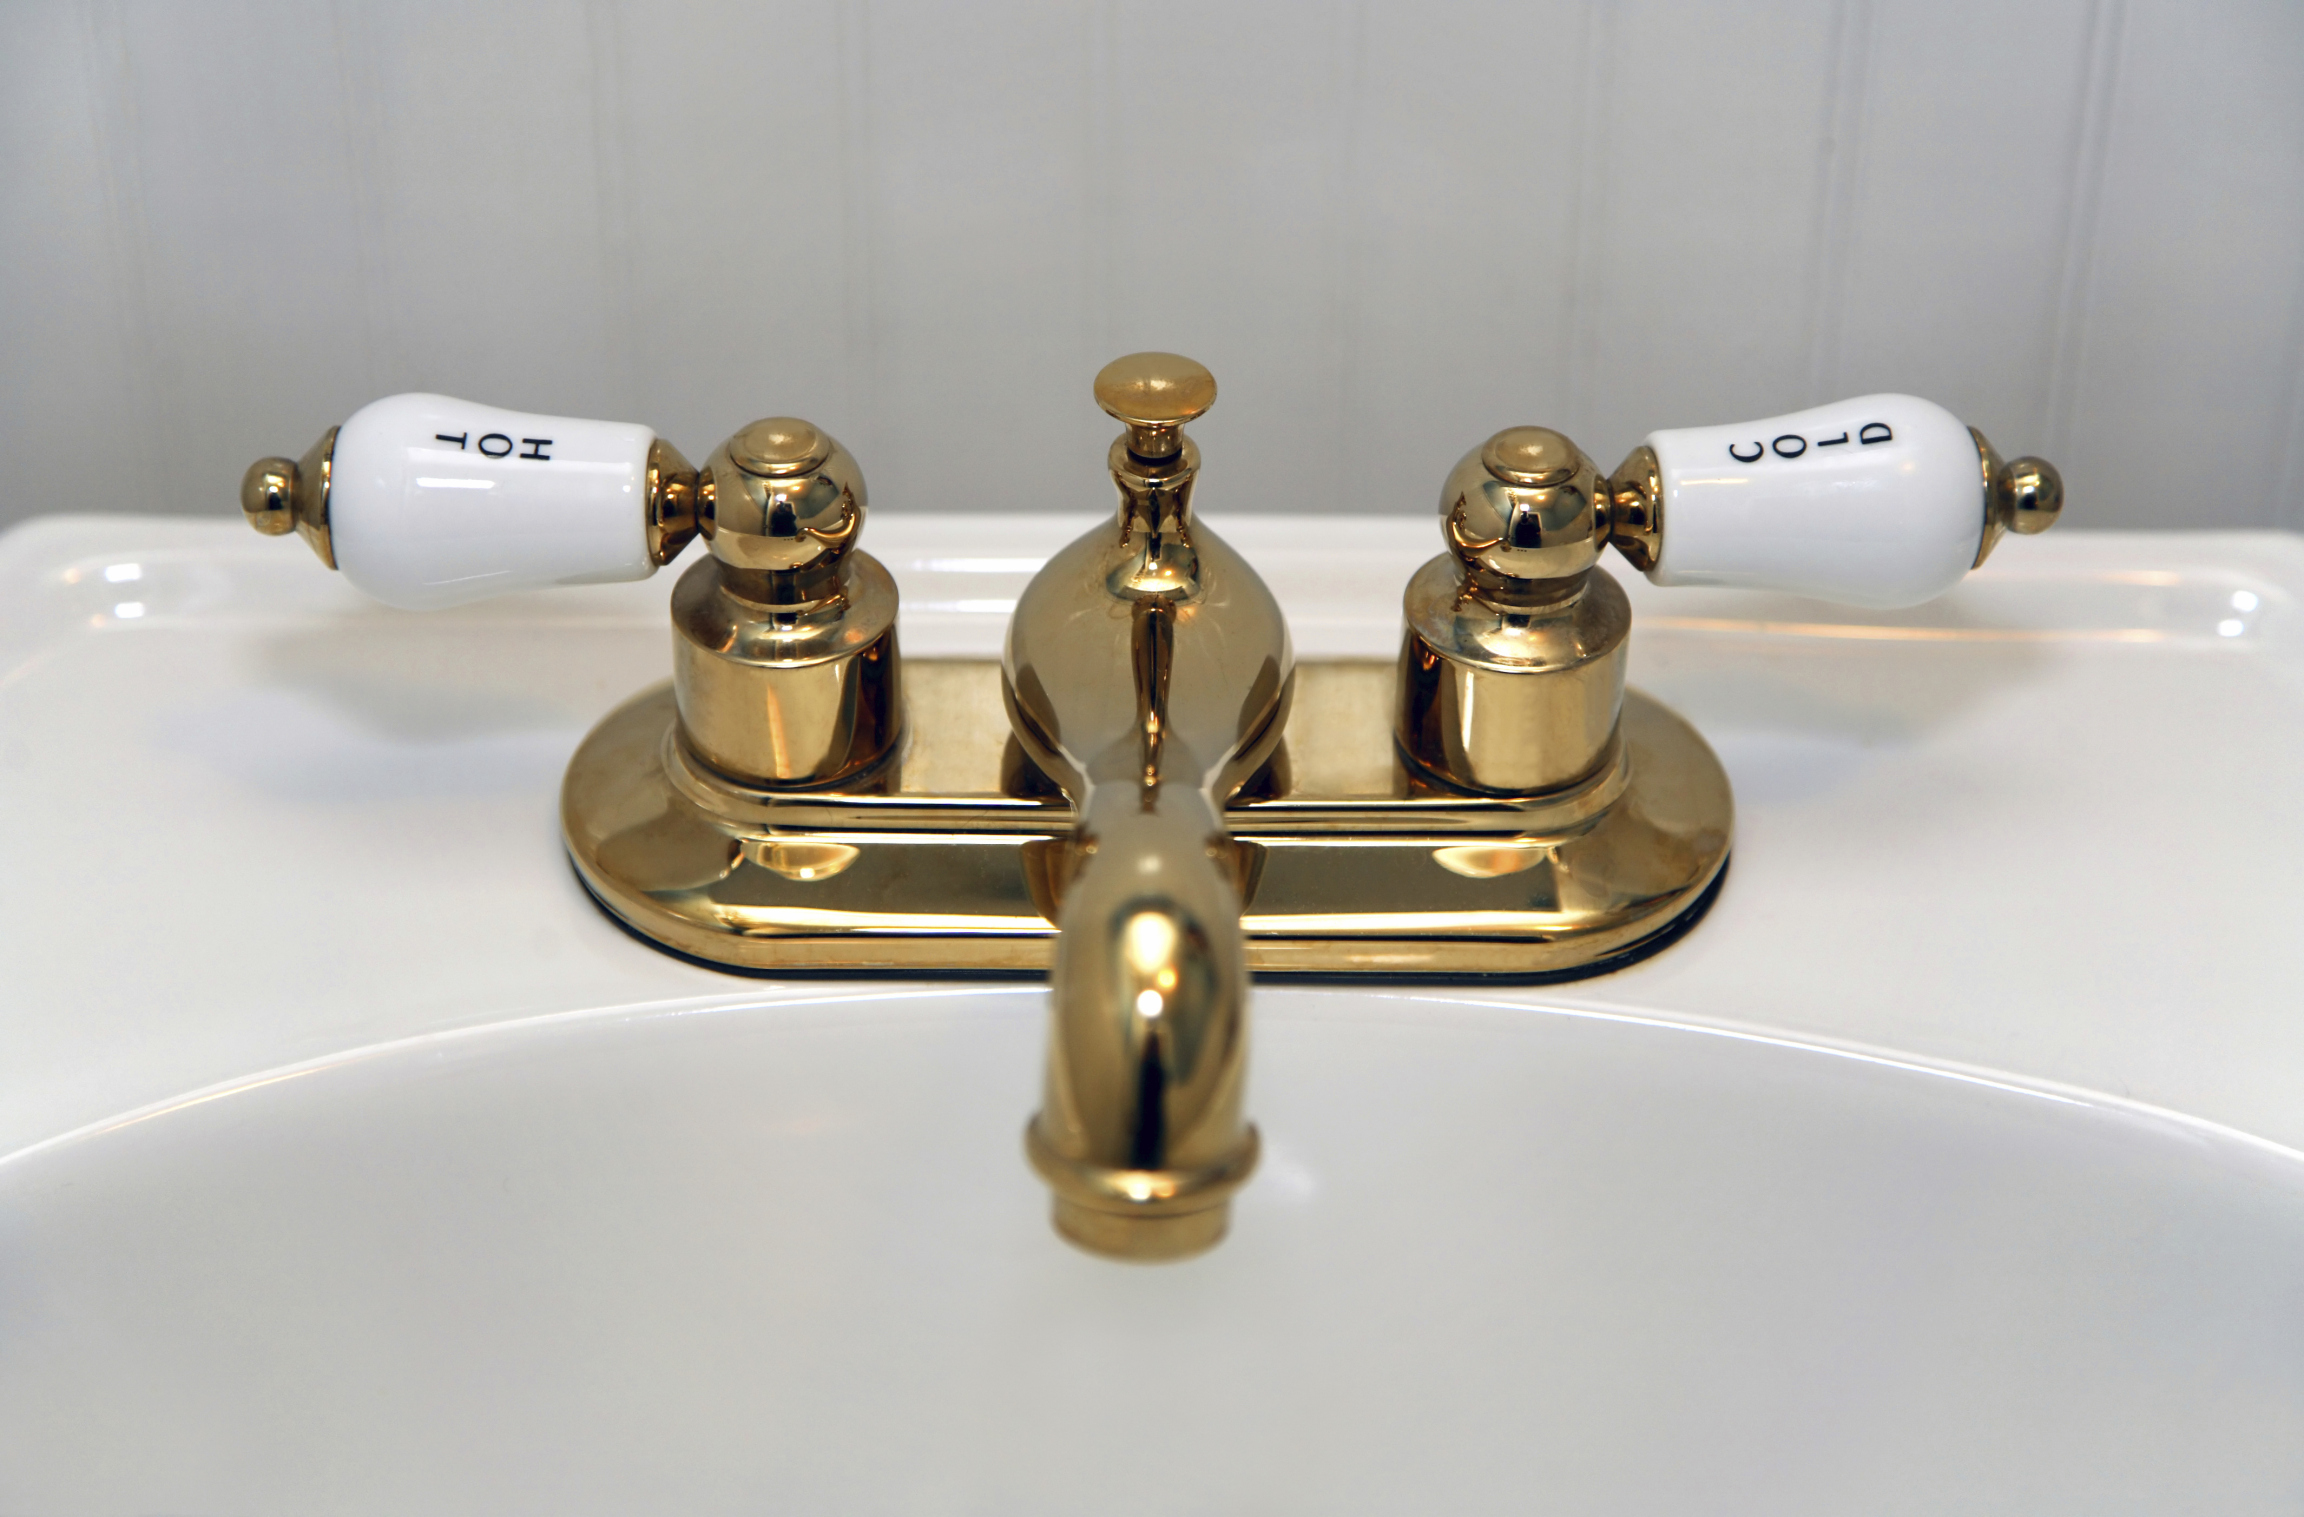 Uncovering the Cause of Marks on Unlacquered Brass Fixtures